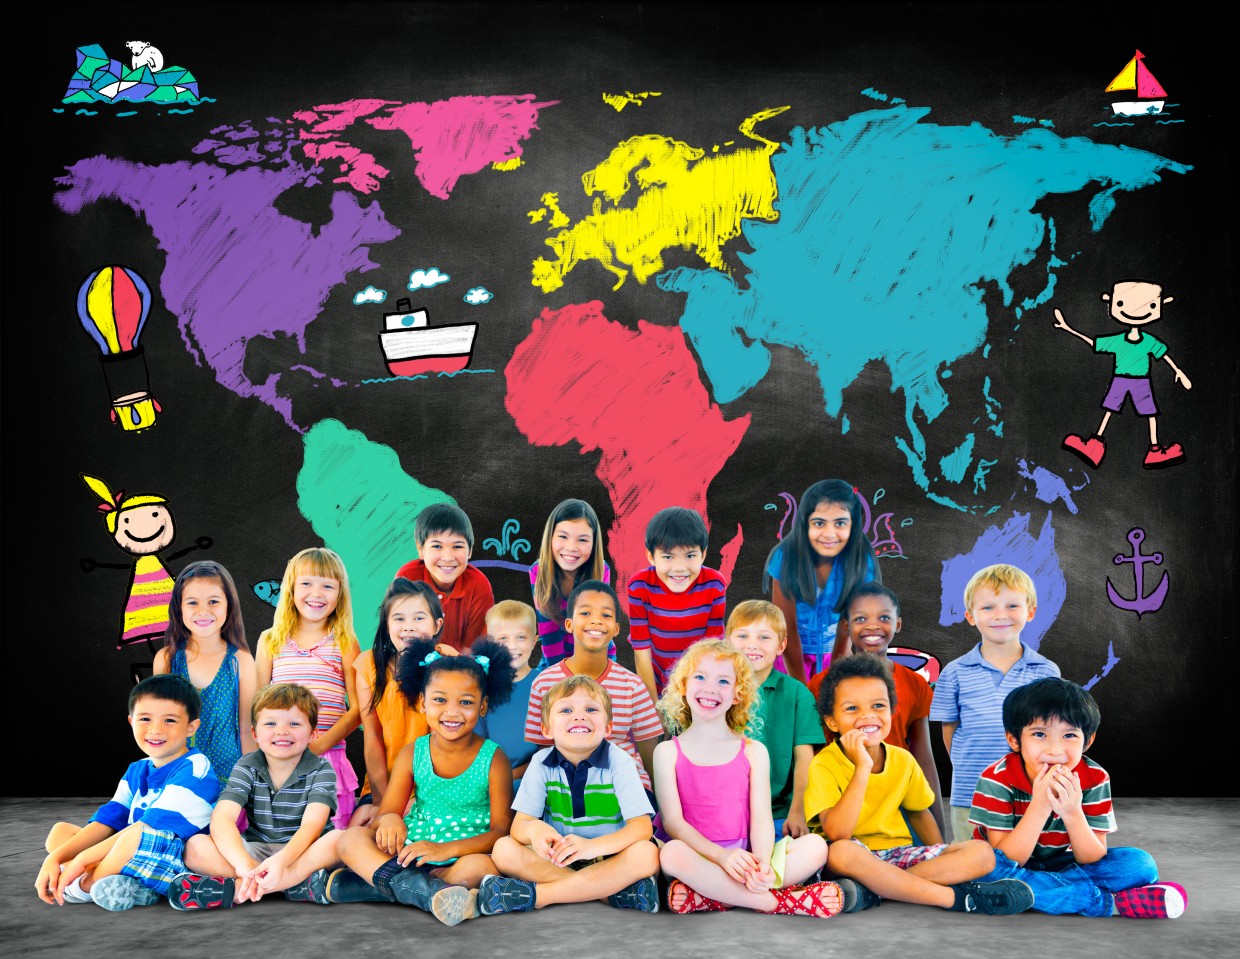 A group of children sit in front of a colorful map of the world.